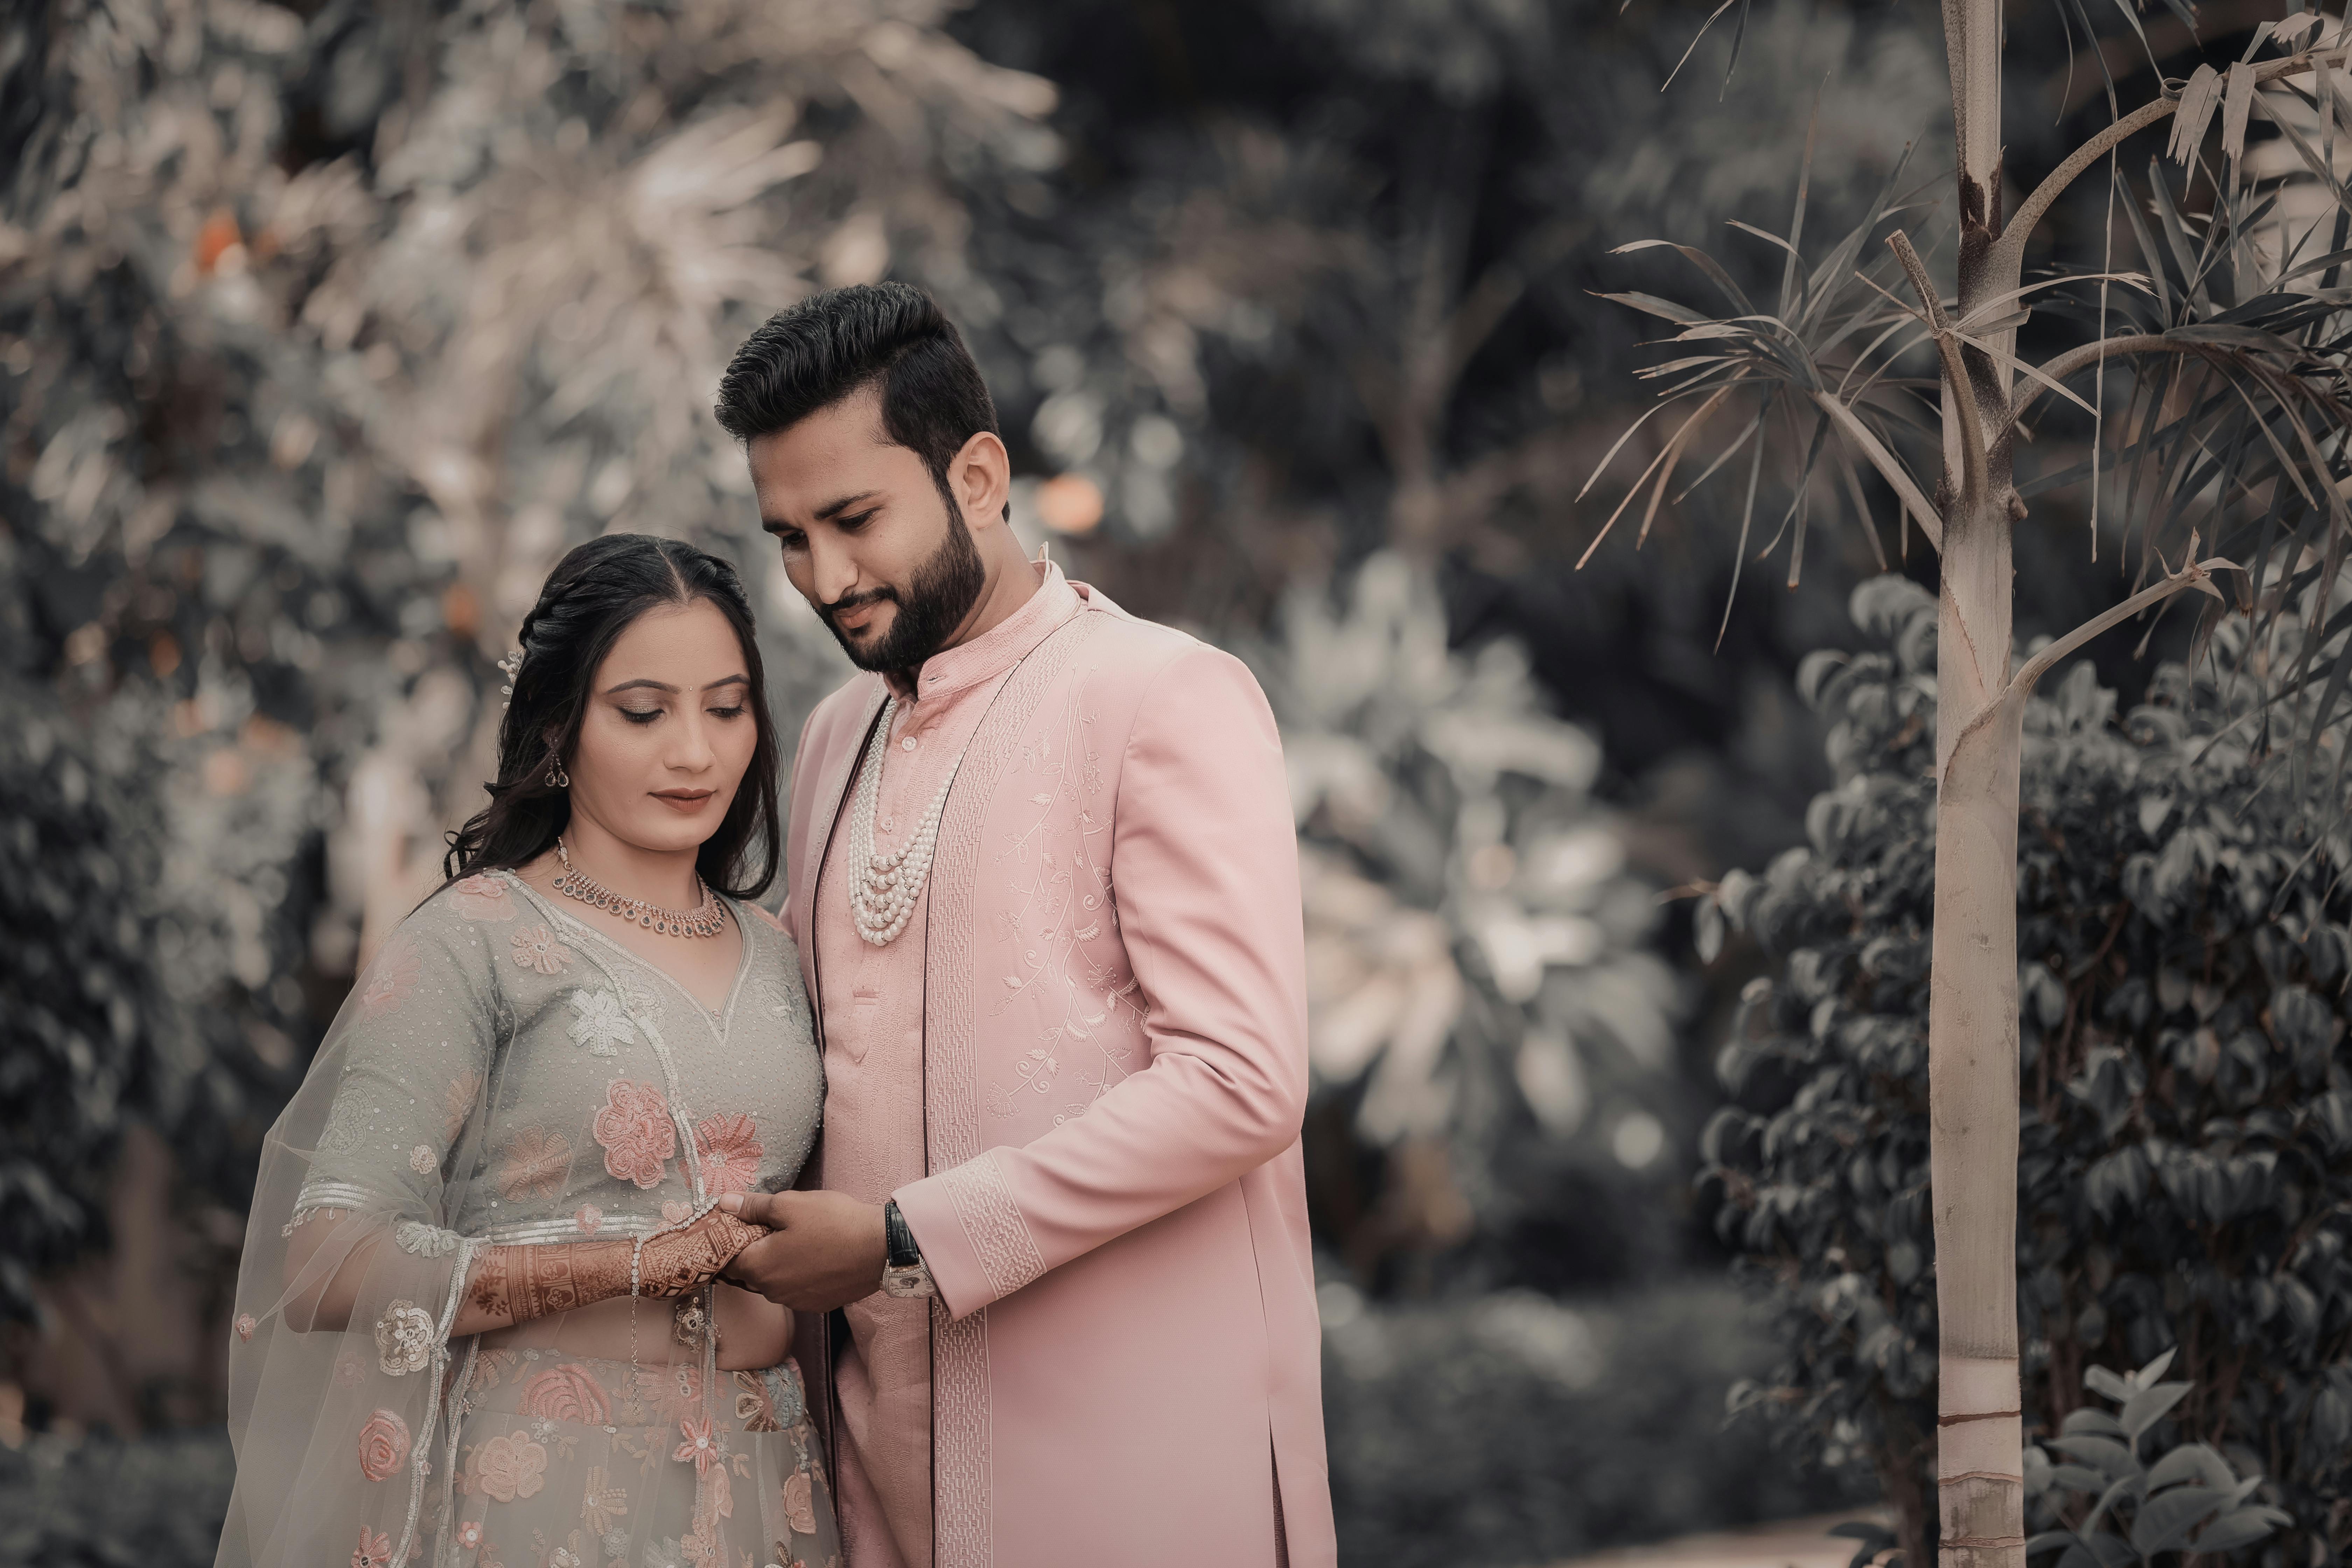 Newly married | Indian wedding photography couples, Indian wedding  photography poses, Wedding photography poses